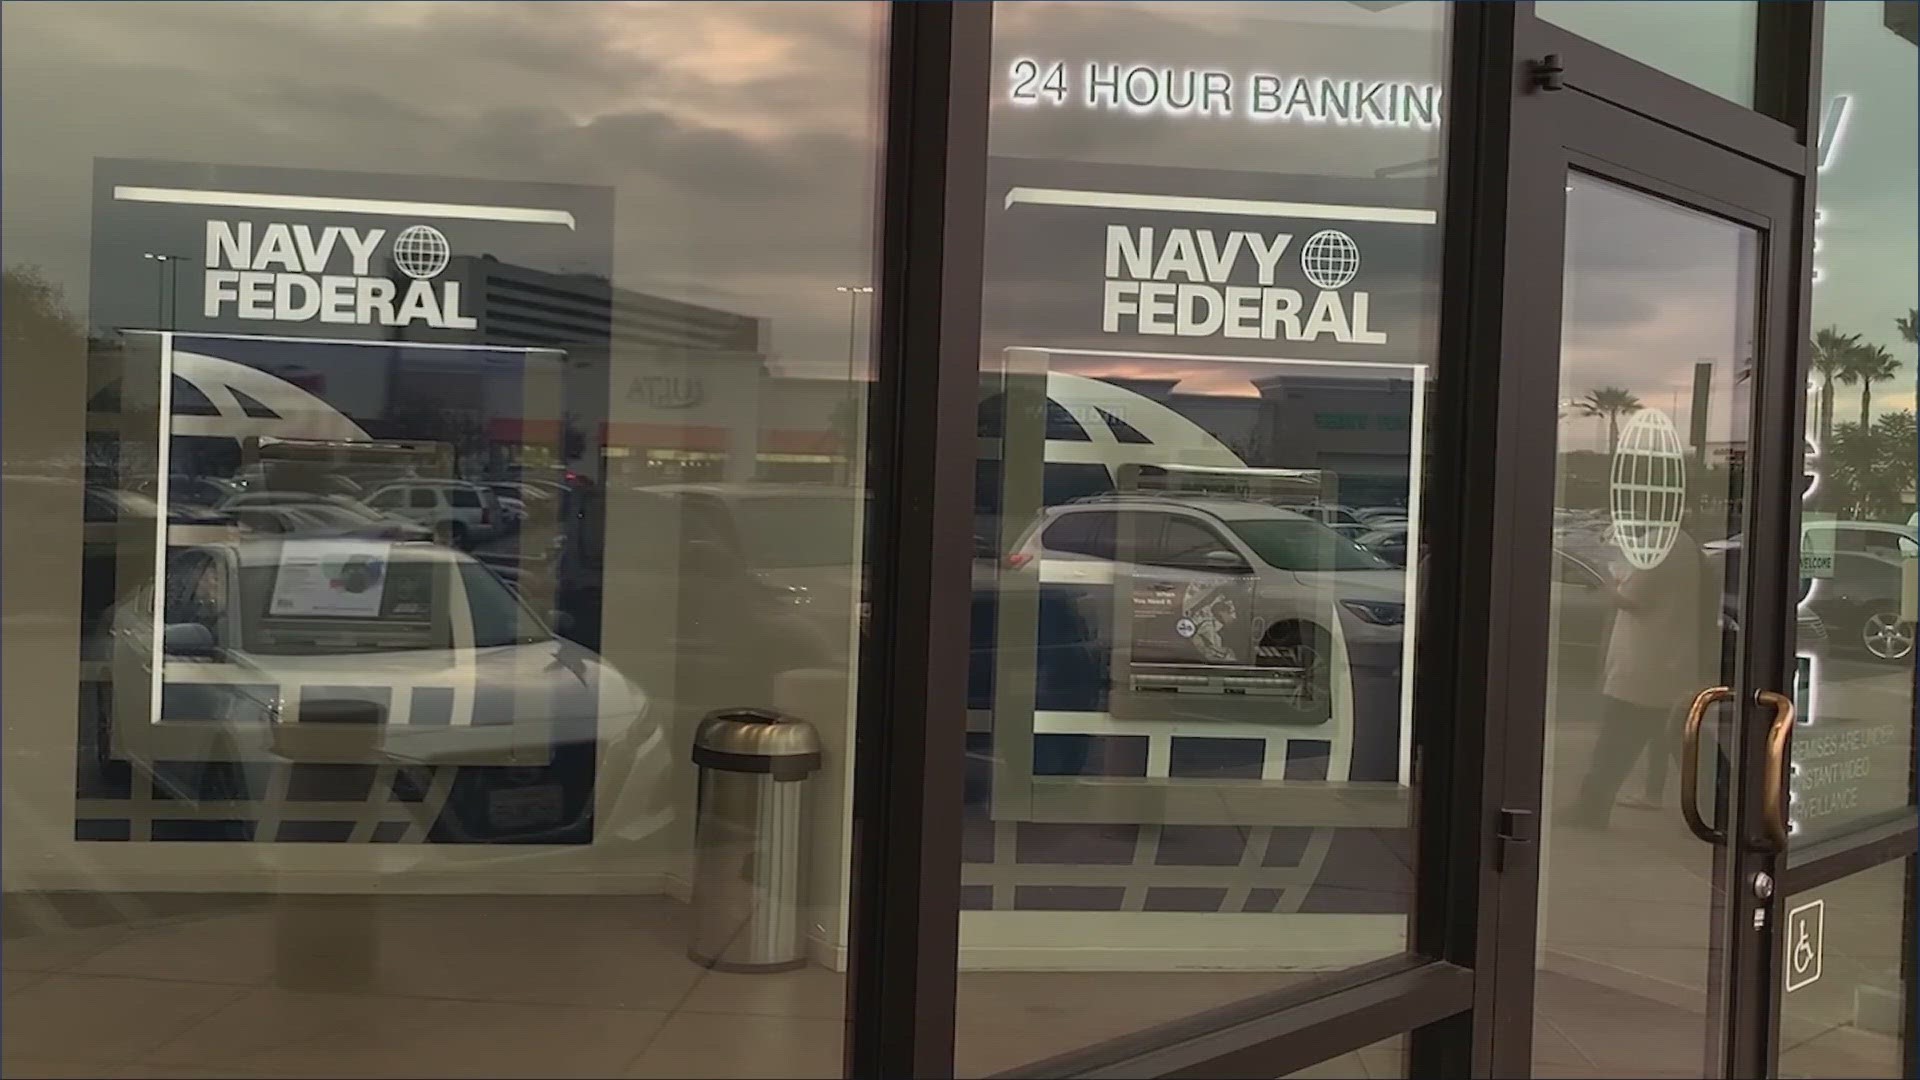 In the wake of a CNN report highlighting the problem, a Portsmouth man said his mortgage refinancing application got denied by Navy Federal.